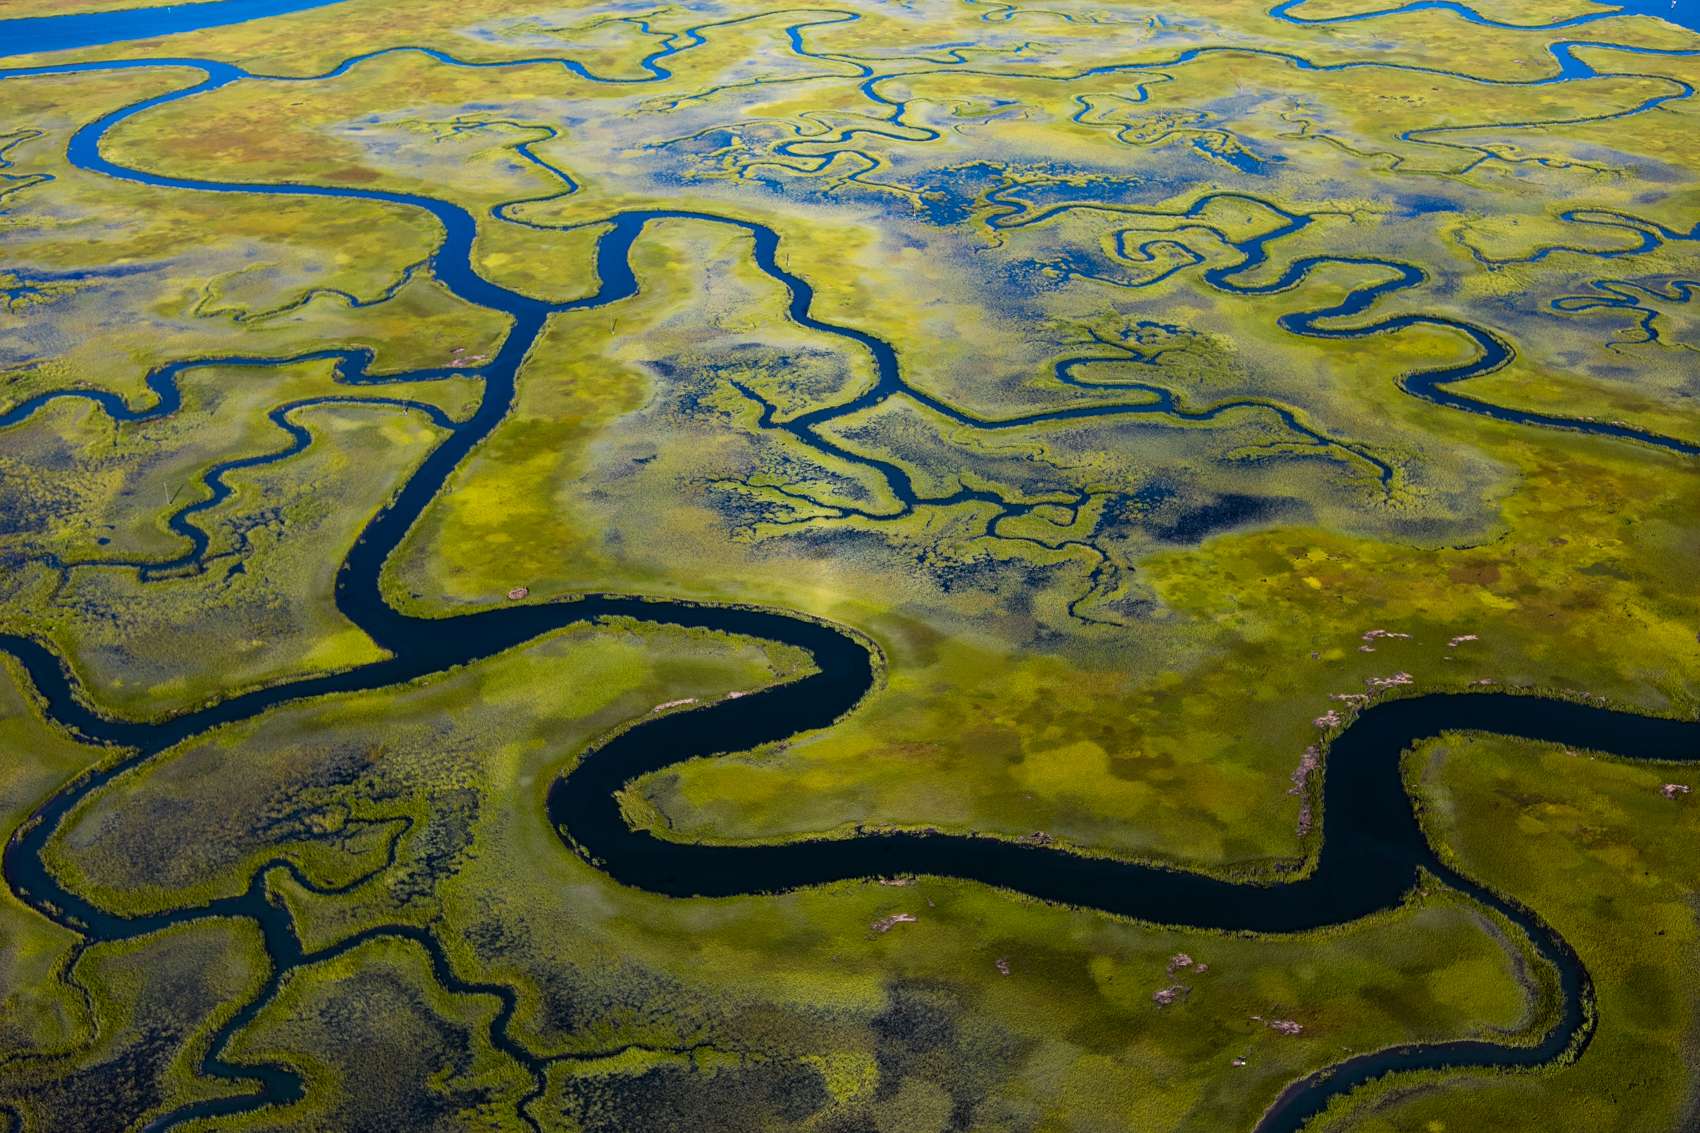 Barrier islands line the lower Delmarva Peninsula on the eastern shore of Virginia. The shallow bay is partially filled in by marshy wetlands. The circulation through the wetlands is driven by tidal currents, passing through the barrier island inlet, lowering and raising water levels in the lagoon.